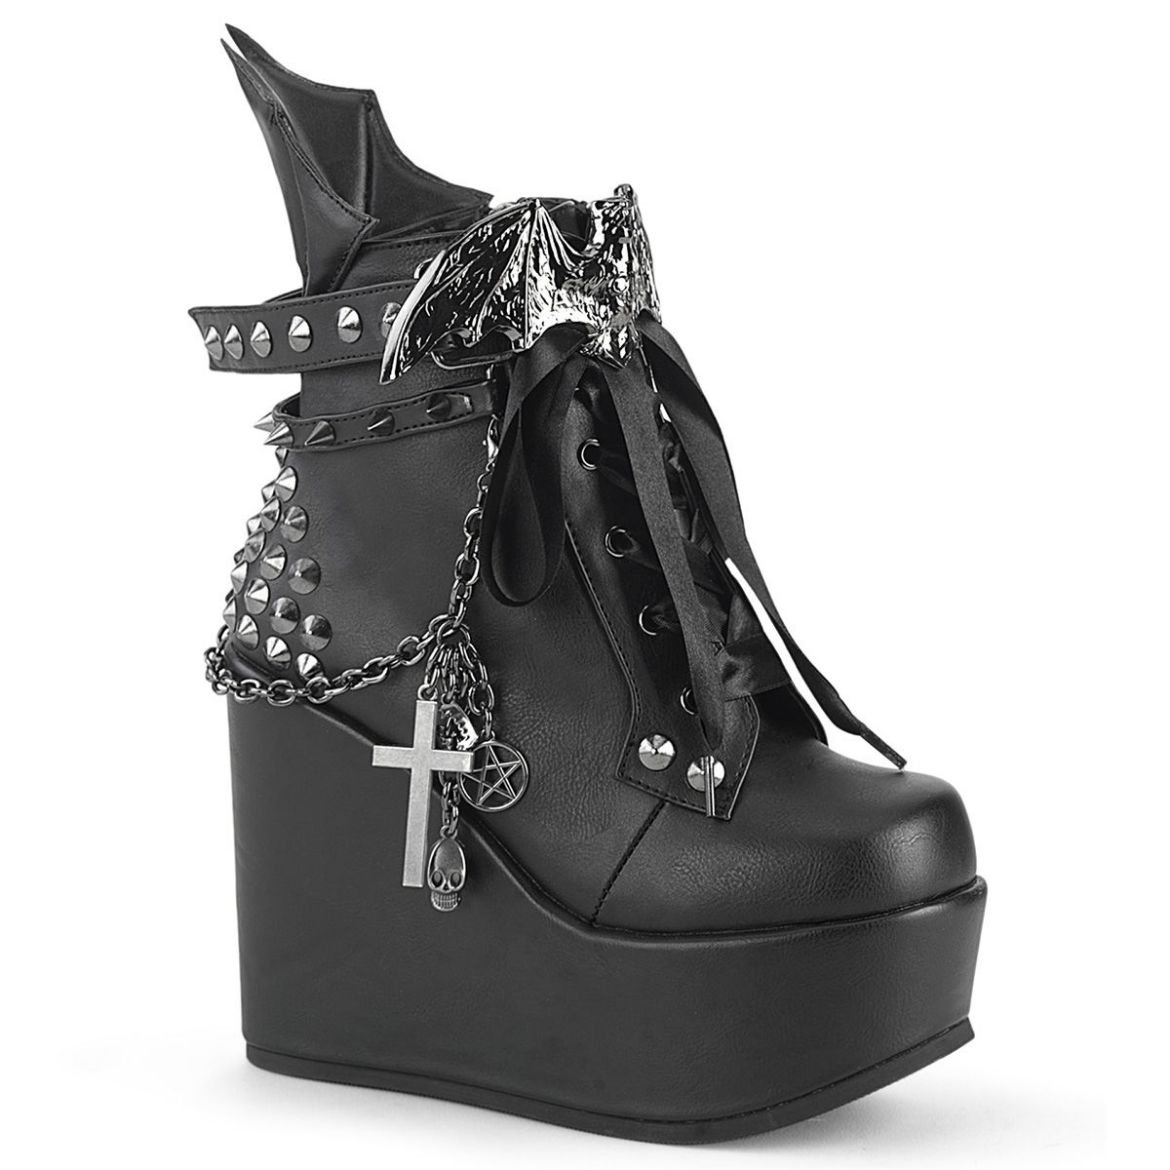 Image of Demonia POISON-107 Blk Vegan Leather 5 Inch Wedge PF Boot w/Straps Studs Assorted Charms & Chain